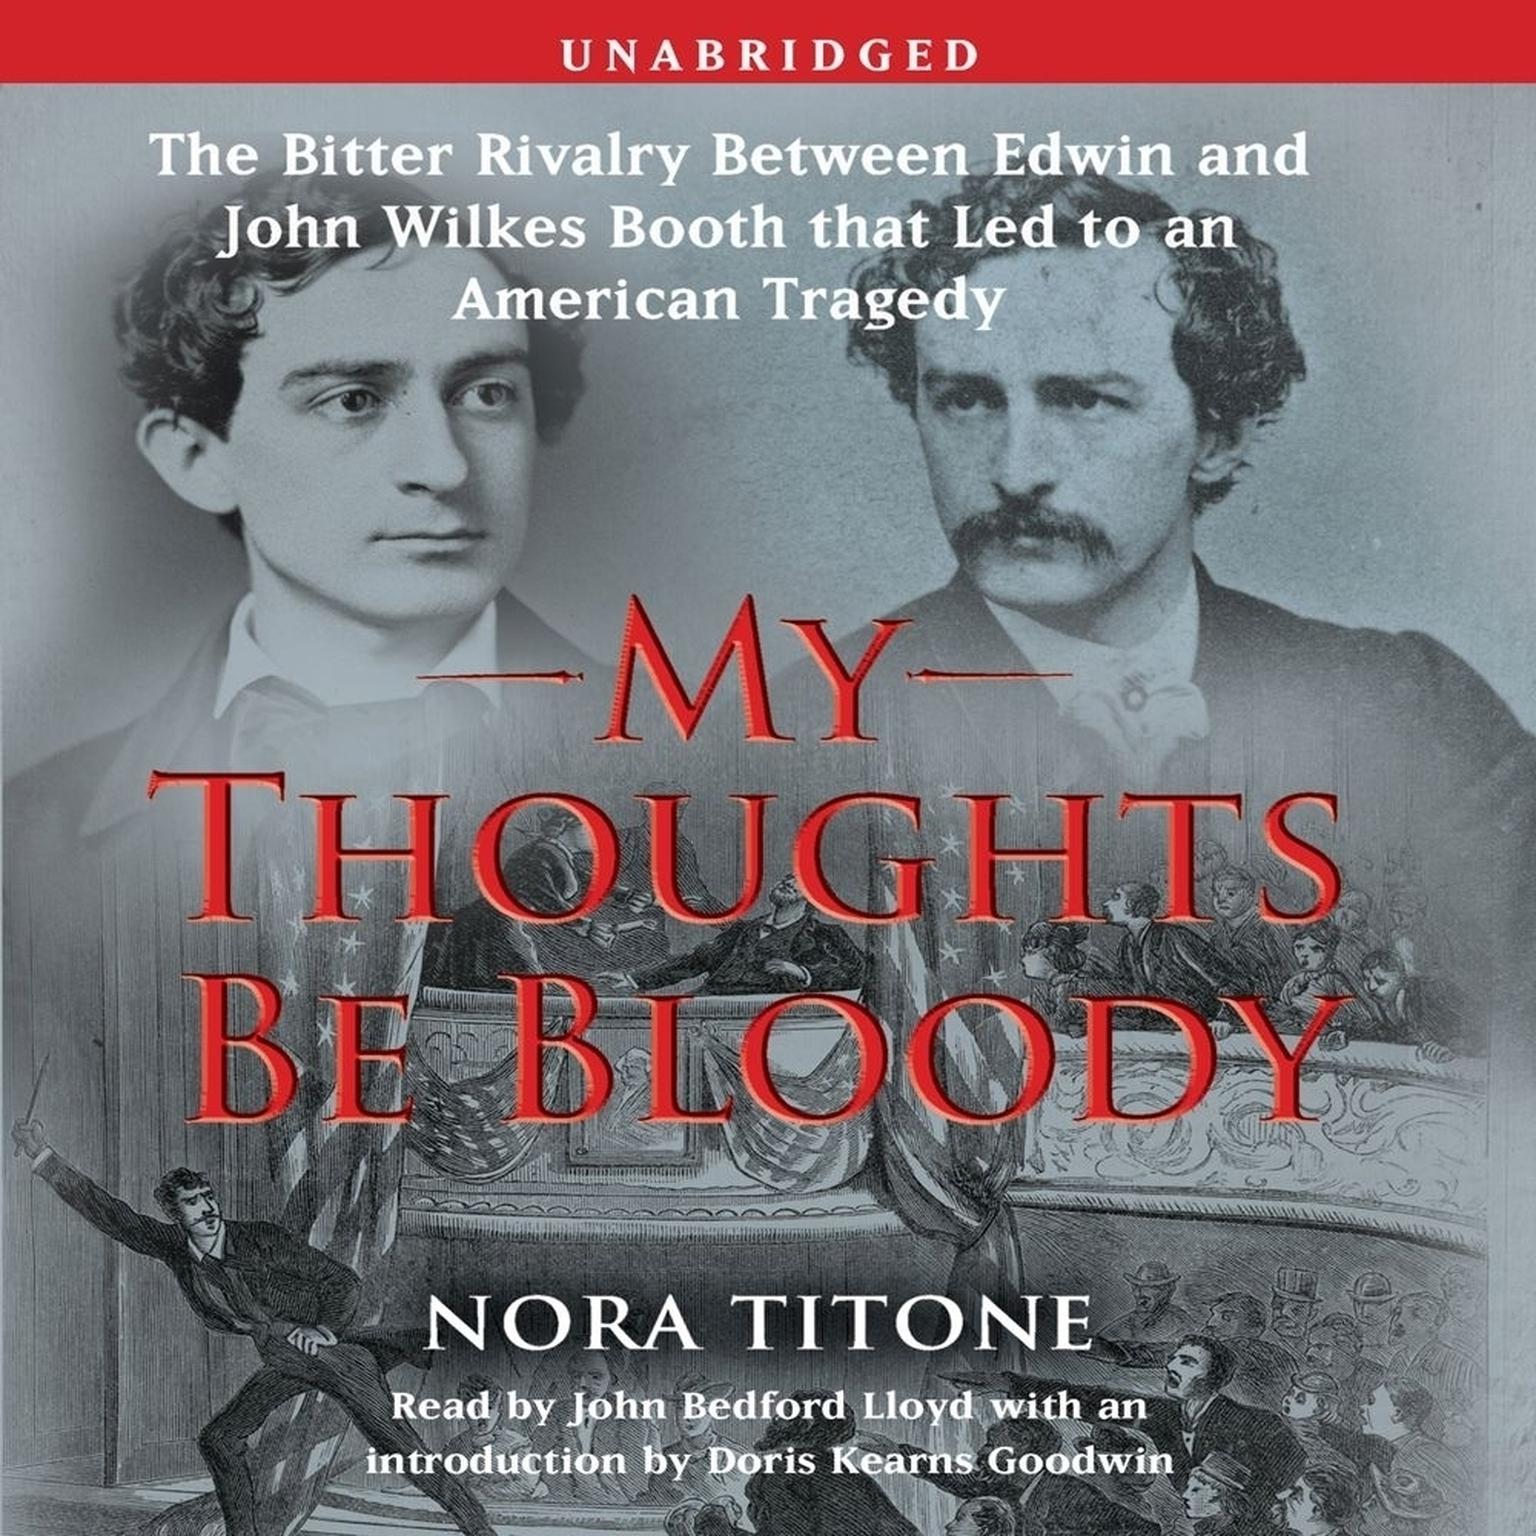 My Thoughts Be Bloody: The Bitter Rivalry Between Edwin and John Wilkes Booth That Led to an American Tragedy Audiobook, by Nora Titone